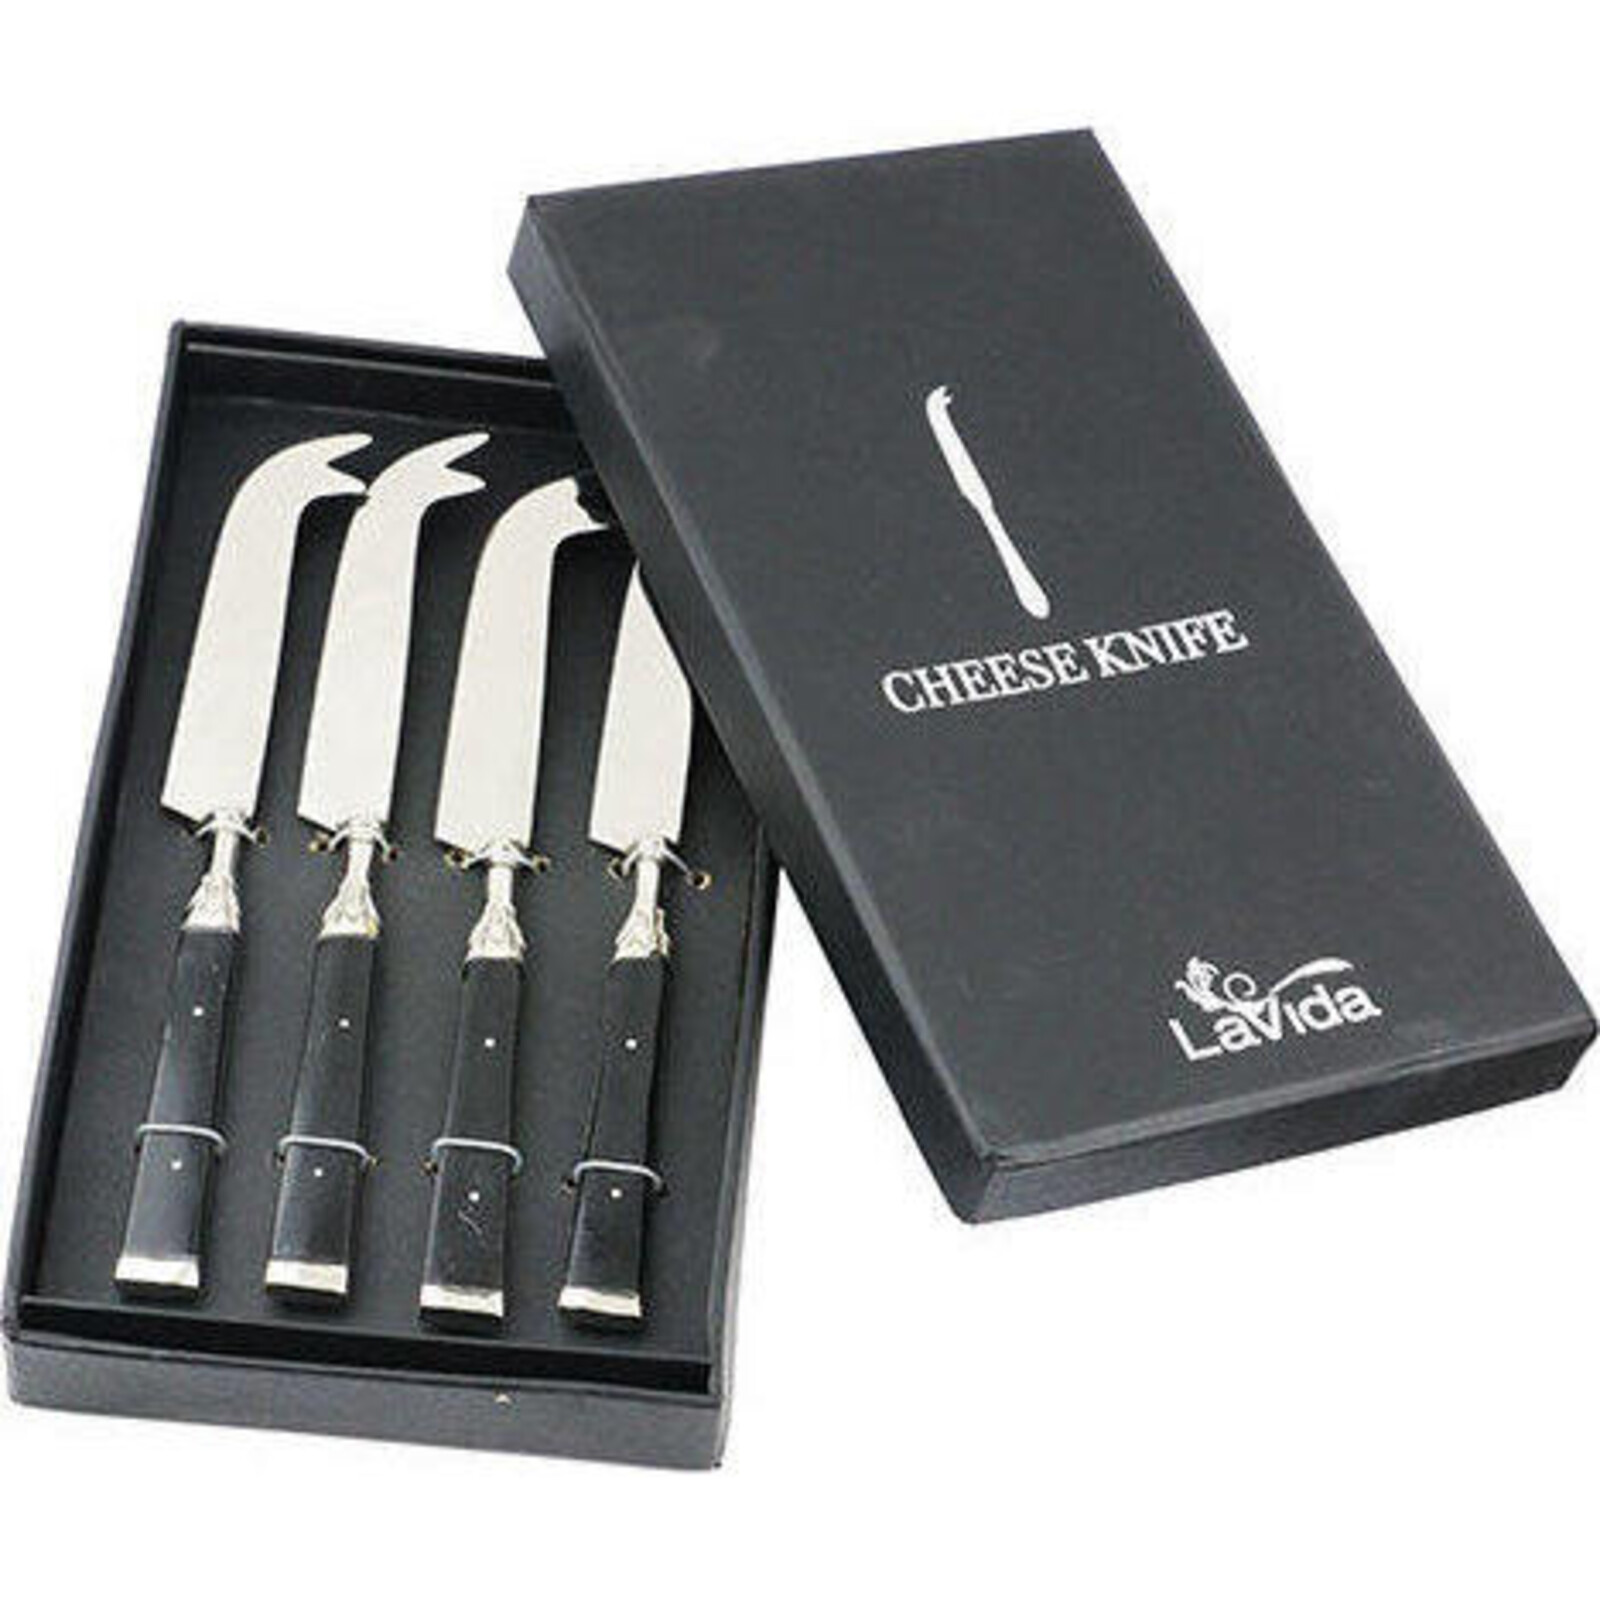 Cheese Knife Classique Set/4